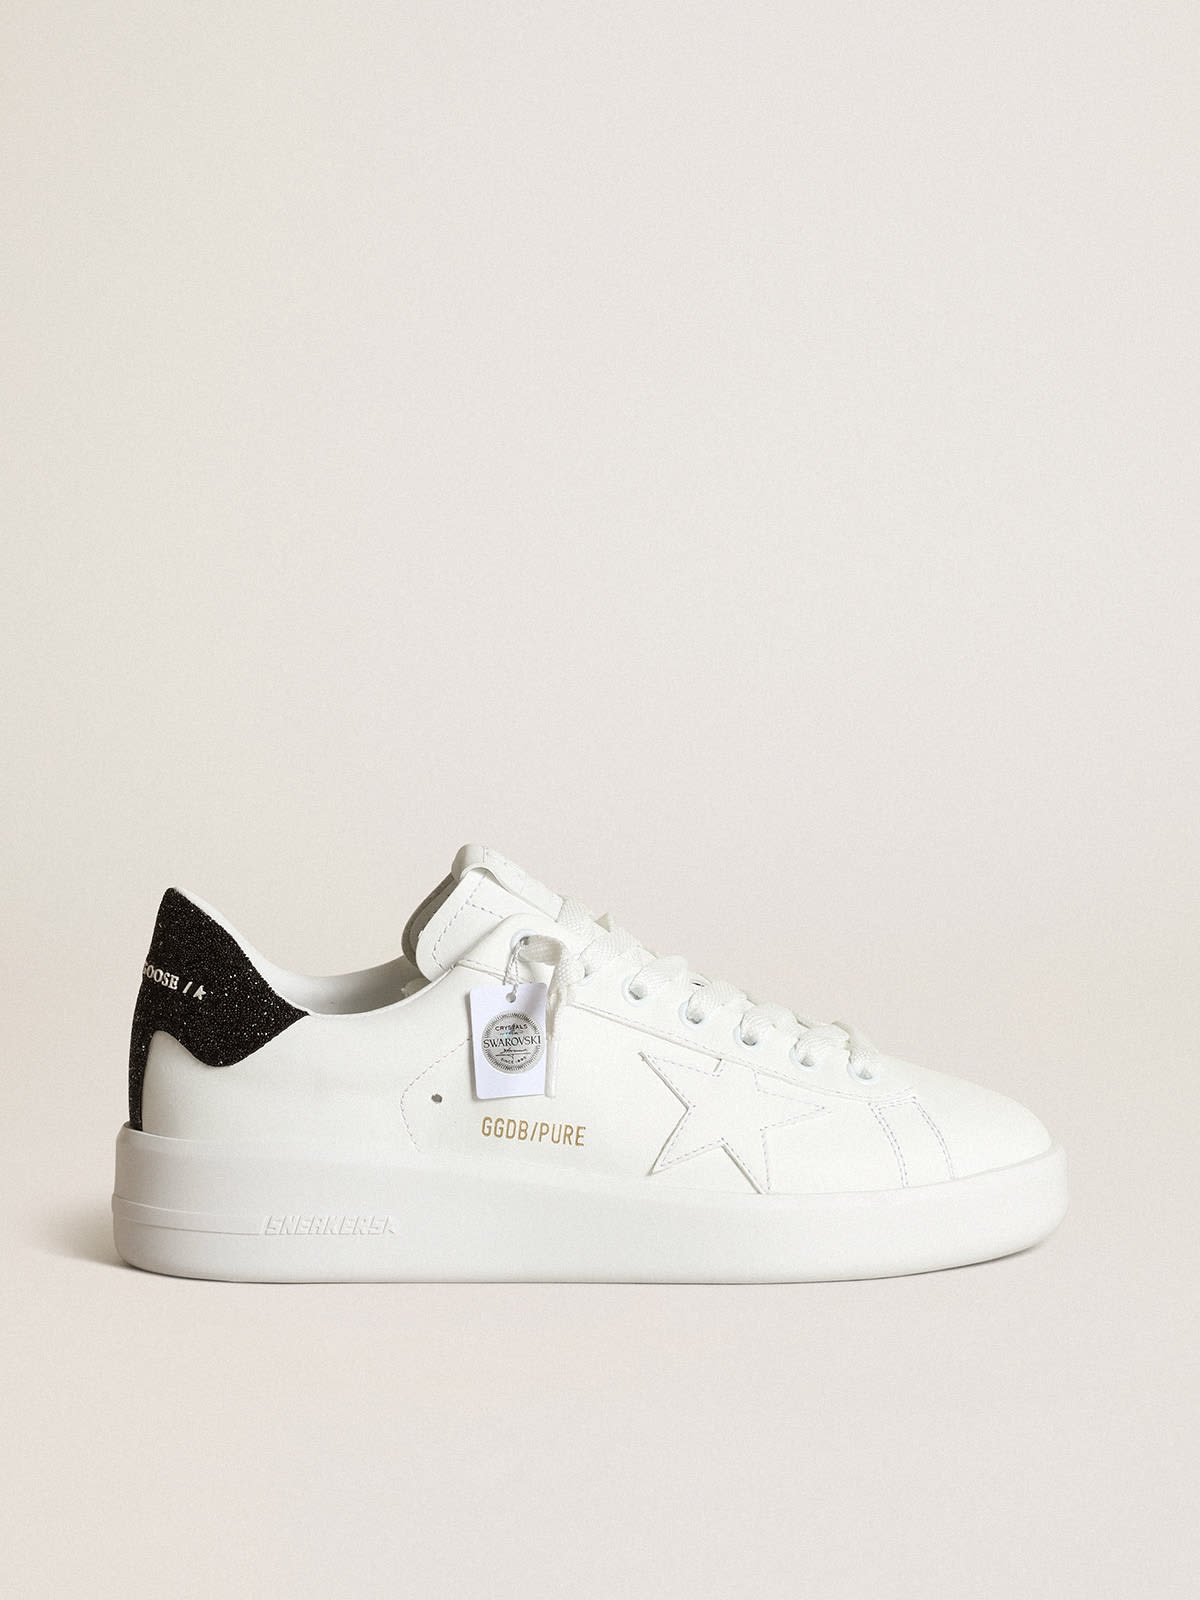 Purestar sneakers in white leather with tone-on-tone star and heel tab in black Swarovski crystals - 1